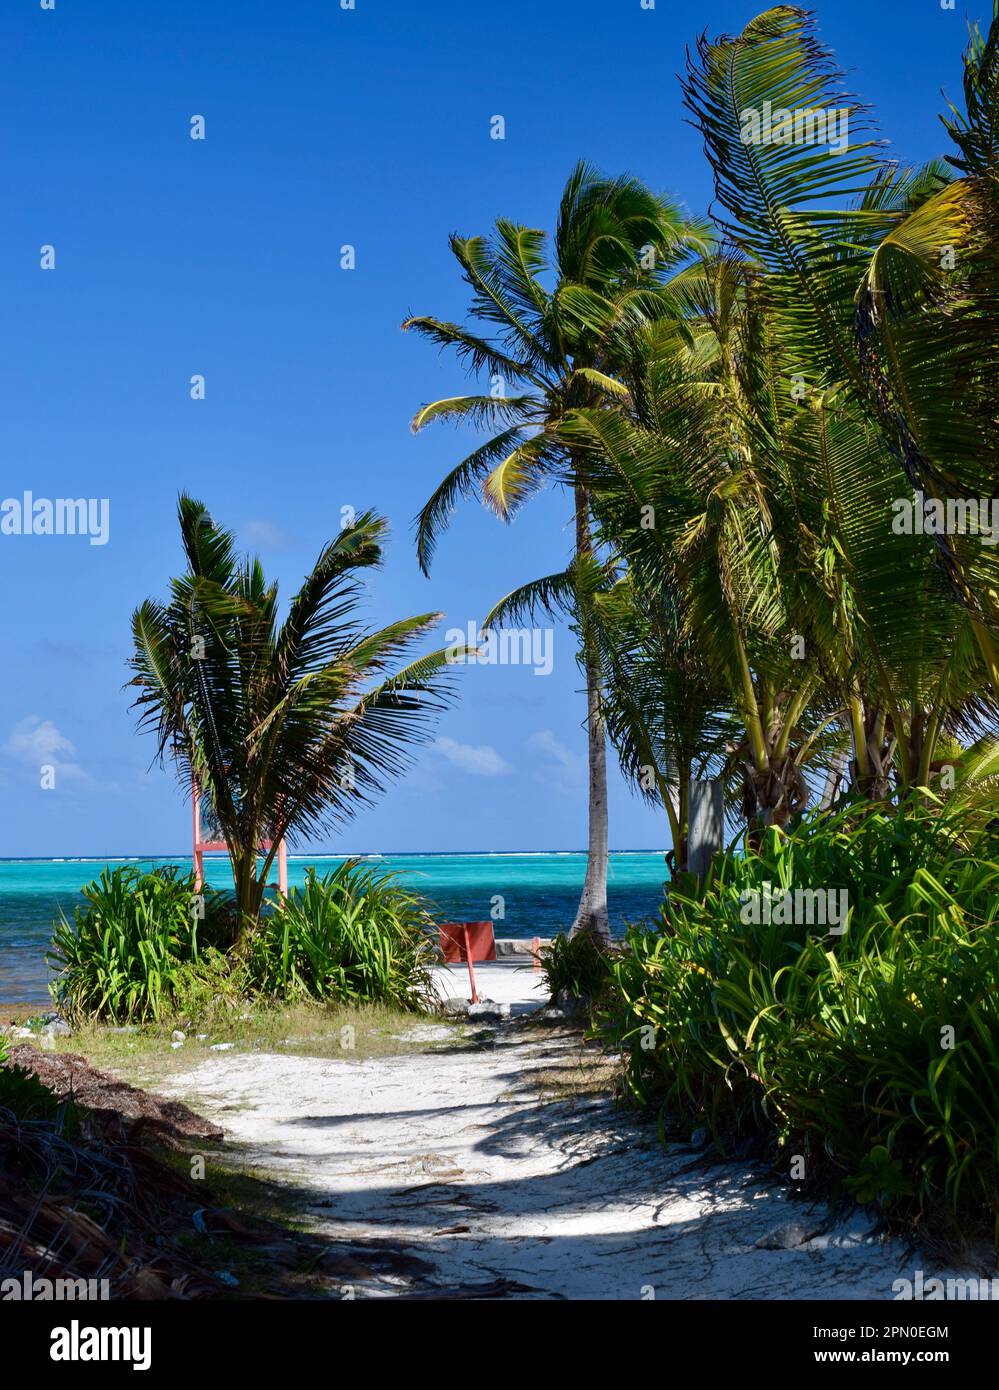 A sandy path leading to the beach and clear, turquoise water on Ambergris Caye, Belize, Caribbean/Central America. Stock Photo